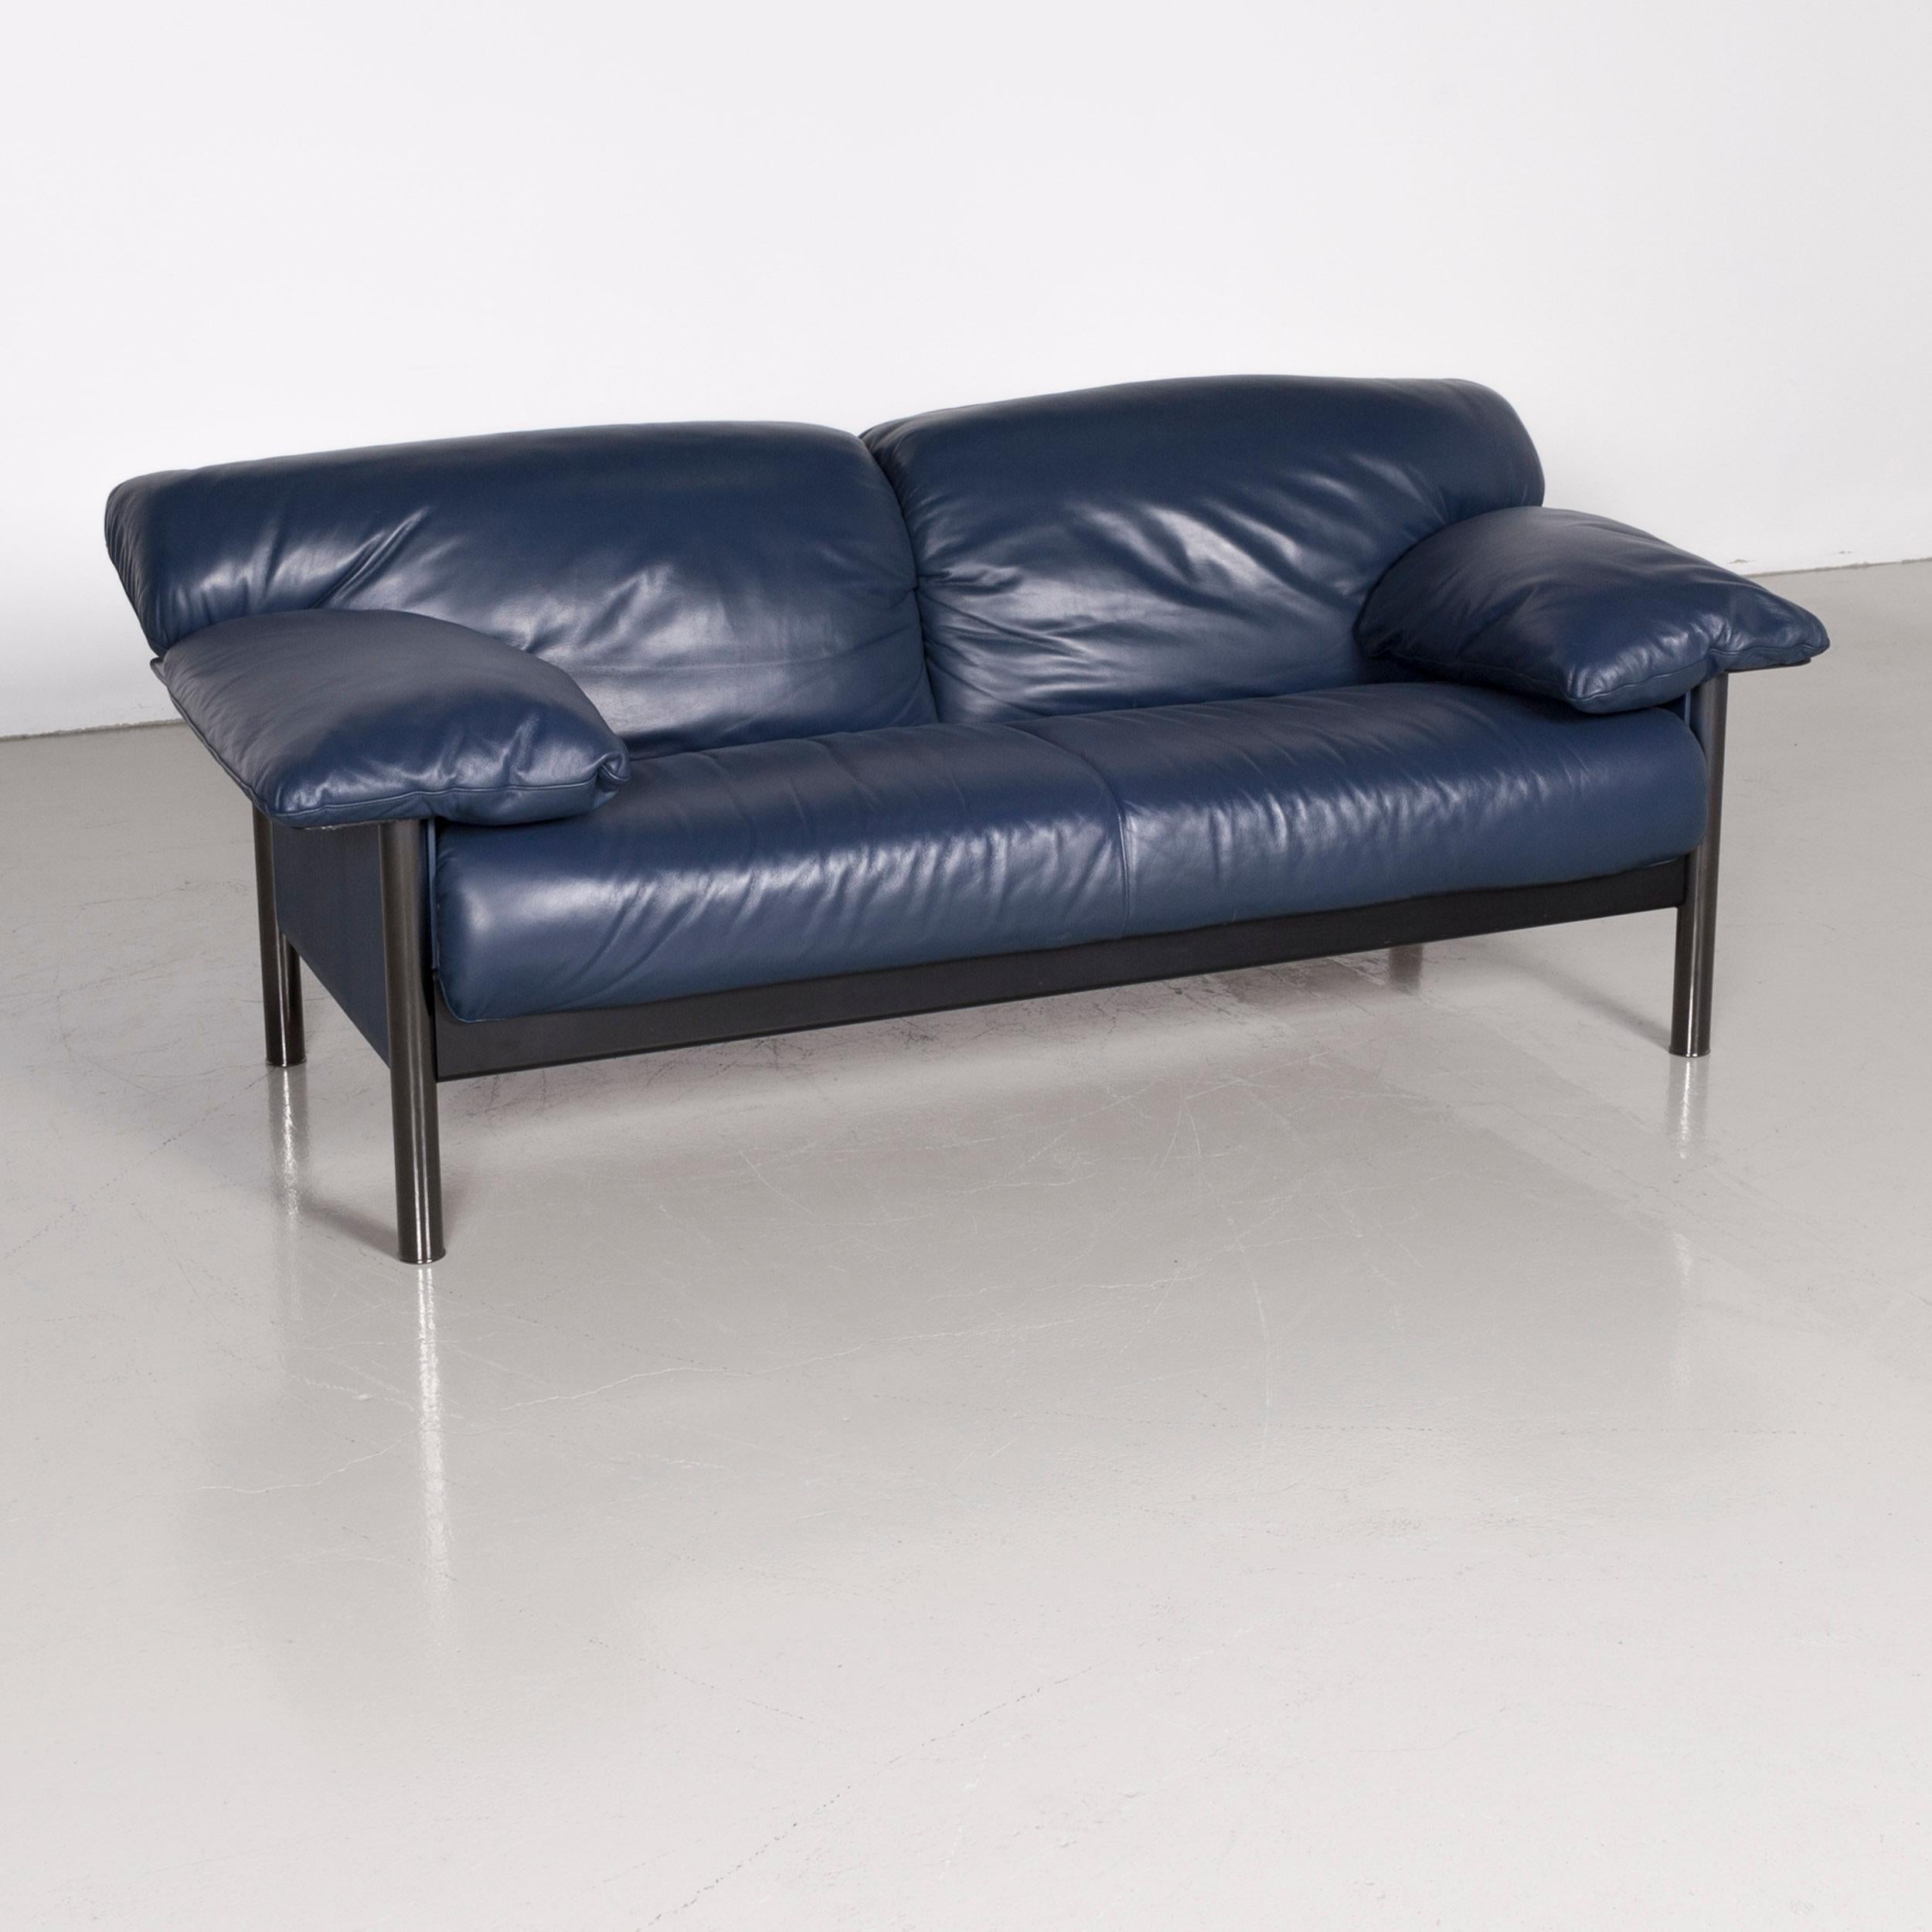 We bring to you a Poltrona Frau designer leather sofa blue genuine leather two-seat couch.

Product measurements in centimeters:

Depth 95
Width 205
Height 80
Seat-height 45
Rest-height 60
Seat-depth 50
Seat-width 120
Back-height 50.
 